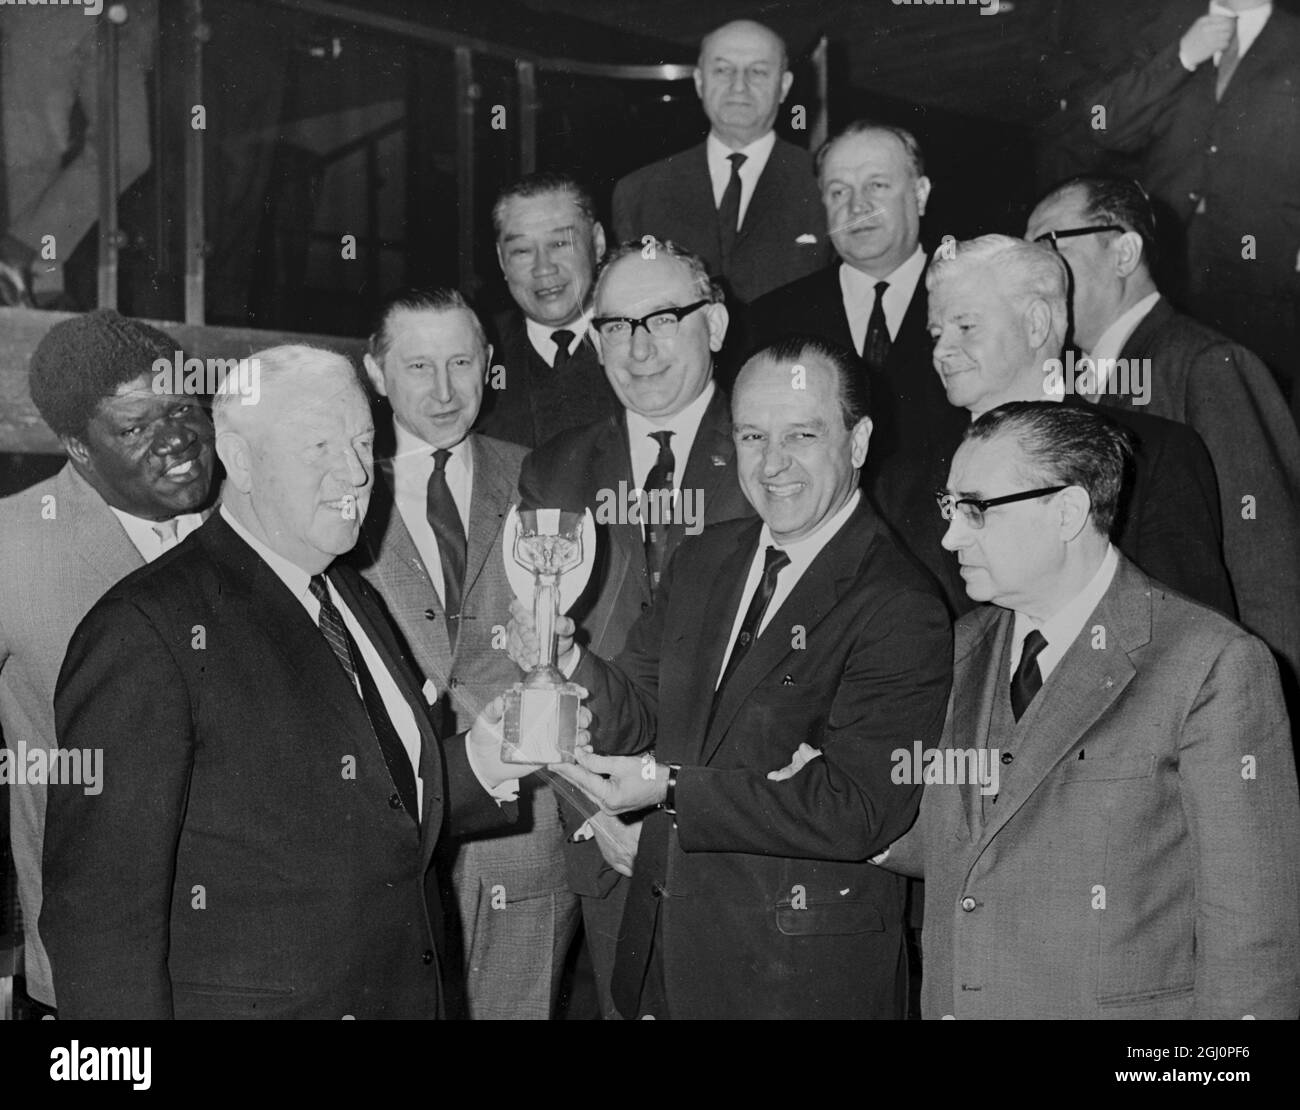 Dr Luiz Murgel , delegate for Brazil , current holders of the world soccer cup , hands over the coveted Jules Rimet trophy to Sir Stanley Rous (left ) , President of FIFA , after the world trophy had arrived in London today . The watching delegates are from right : Dr Ottorino Barassi (Italy) ; Jim Maguire (in rear, white hair) , of USA ; Harry Cavan (centre, glasses) , of Northern Ireland ; Lim Zee Siong (in rear) , of Malaya , and Dr Helmet Kaeser (next to Mr Cavan) , General Secretary , FIFA . The world cup football tournament takes place in the United Kingdom in July 5 January 1966 Stock Photo